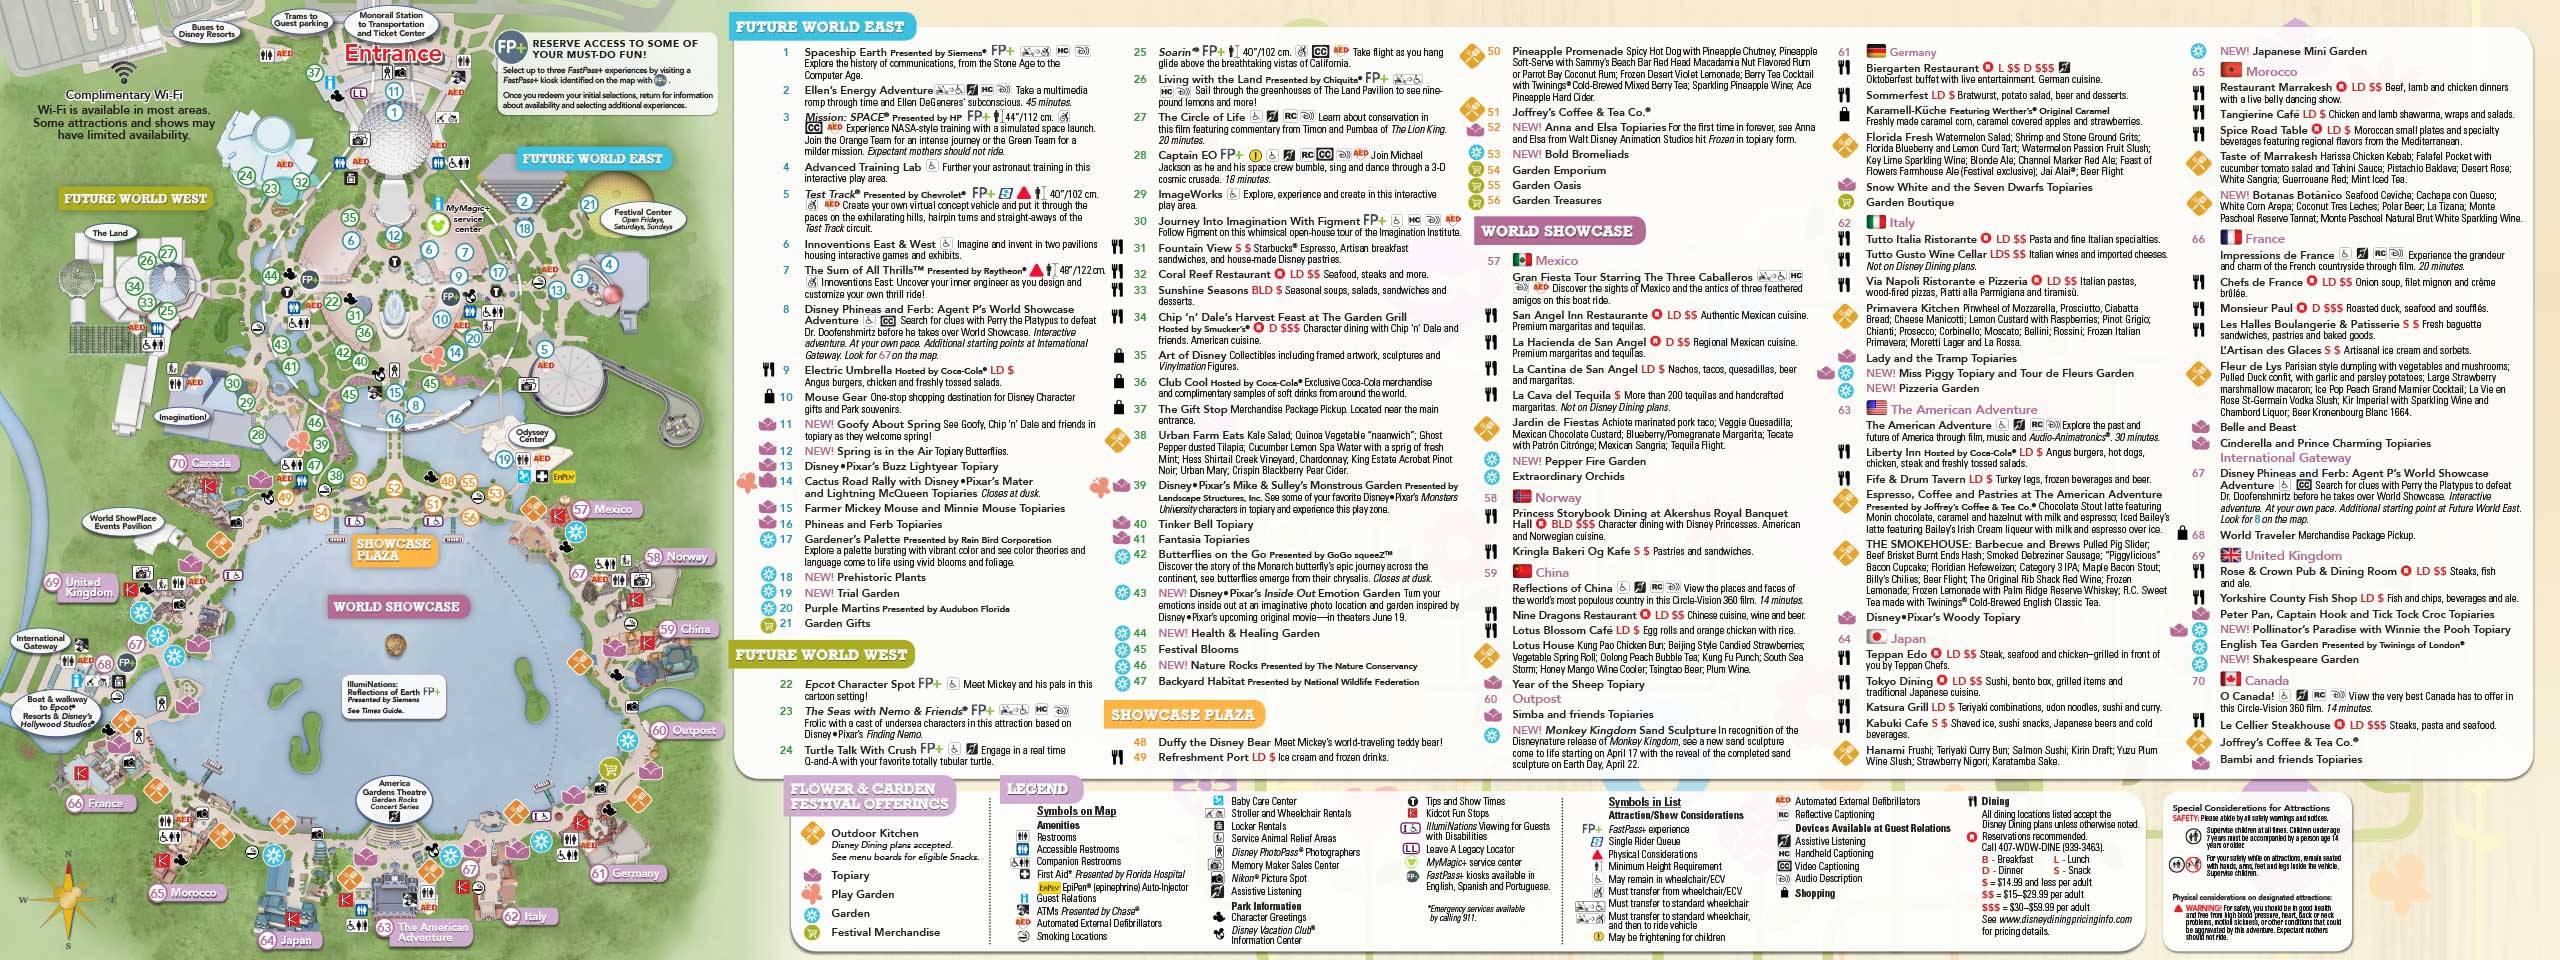 2015 Epcot Flower and Garden Festival guide map